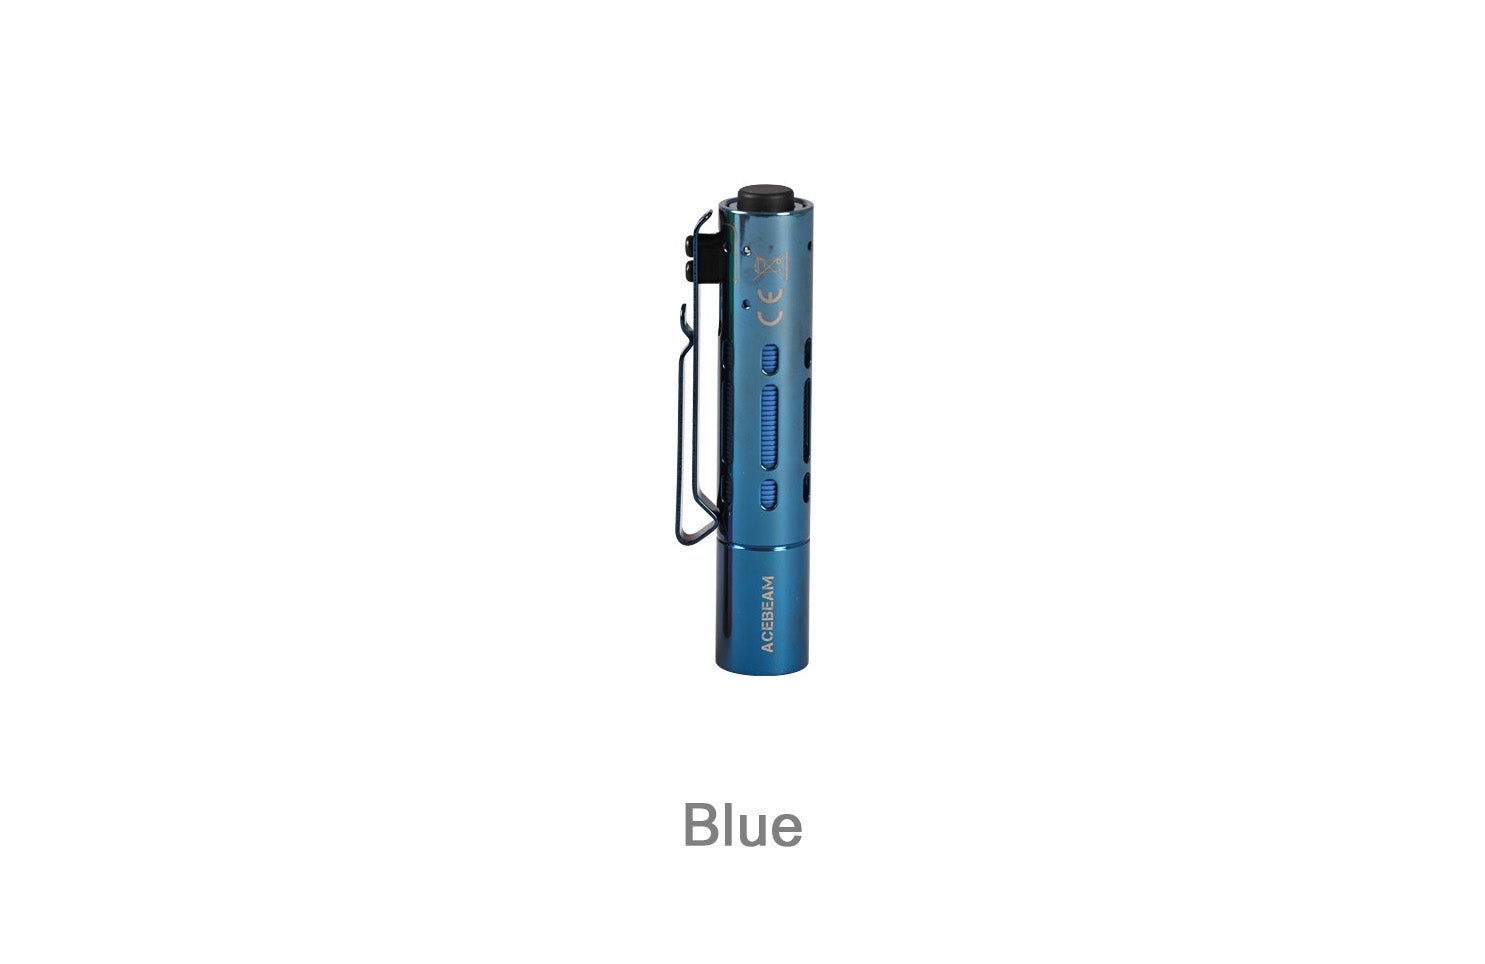 Acebeam Rider RX Stainless Steel EDC AA LED Flashlight With 14500 Battery BLUE